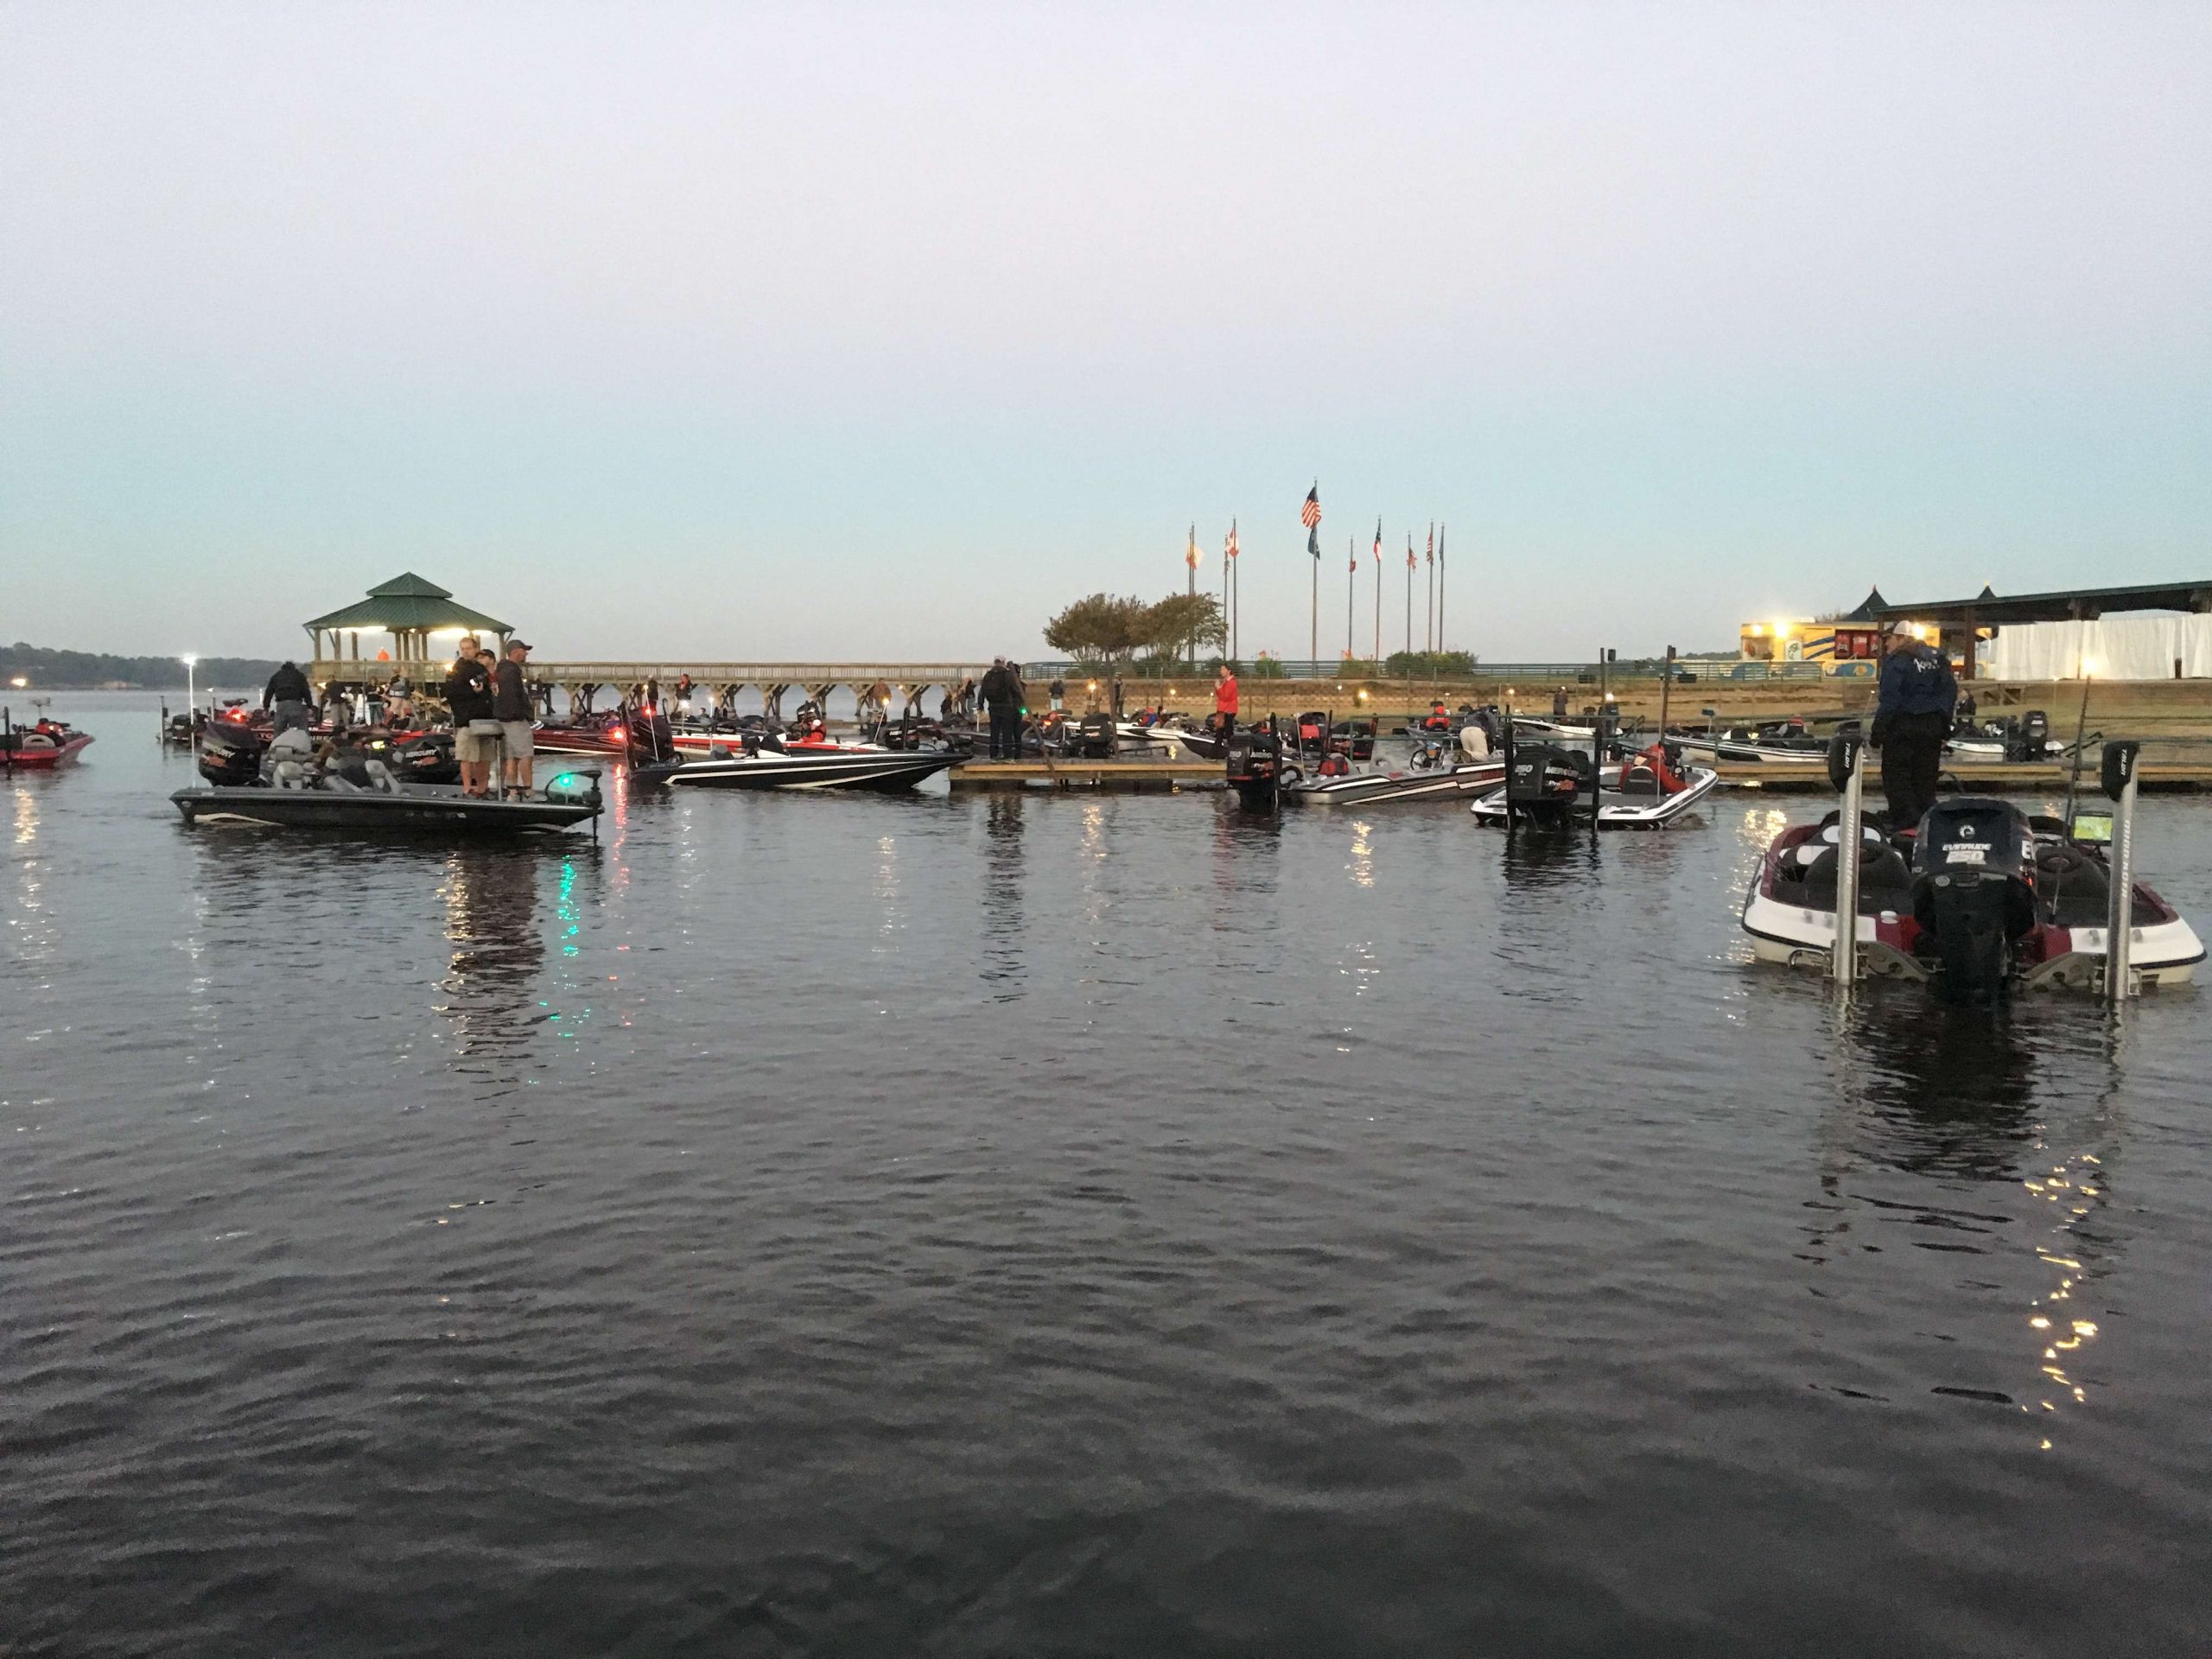 Tensions are high as $5,000 is awaiting the dayâs best angler.